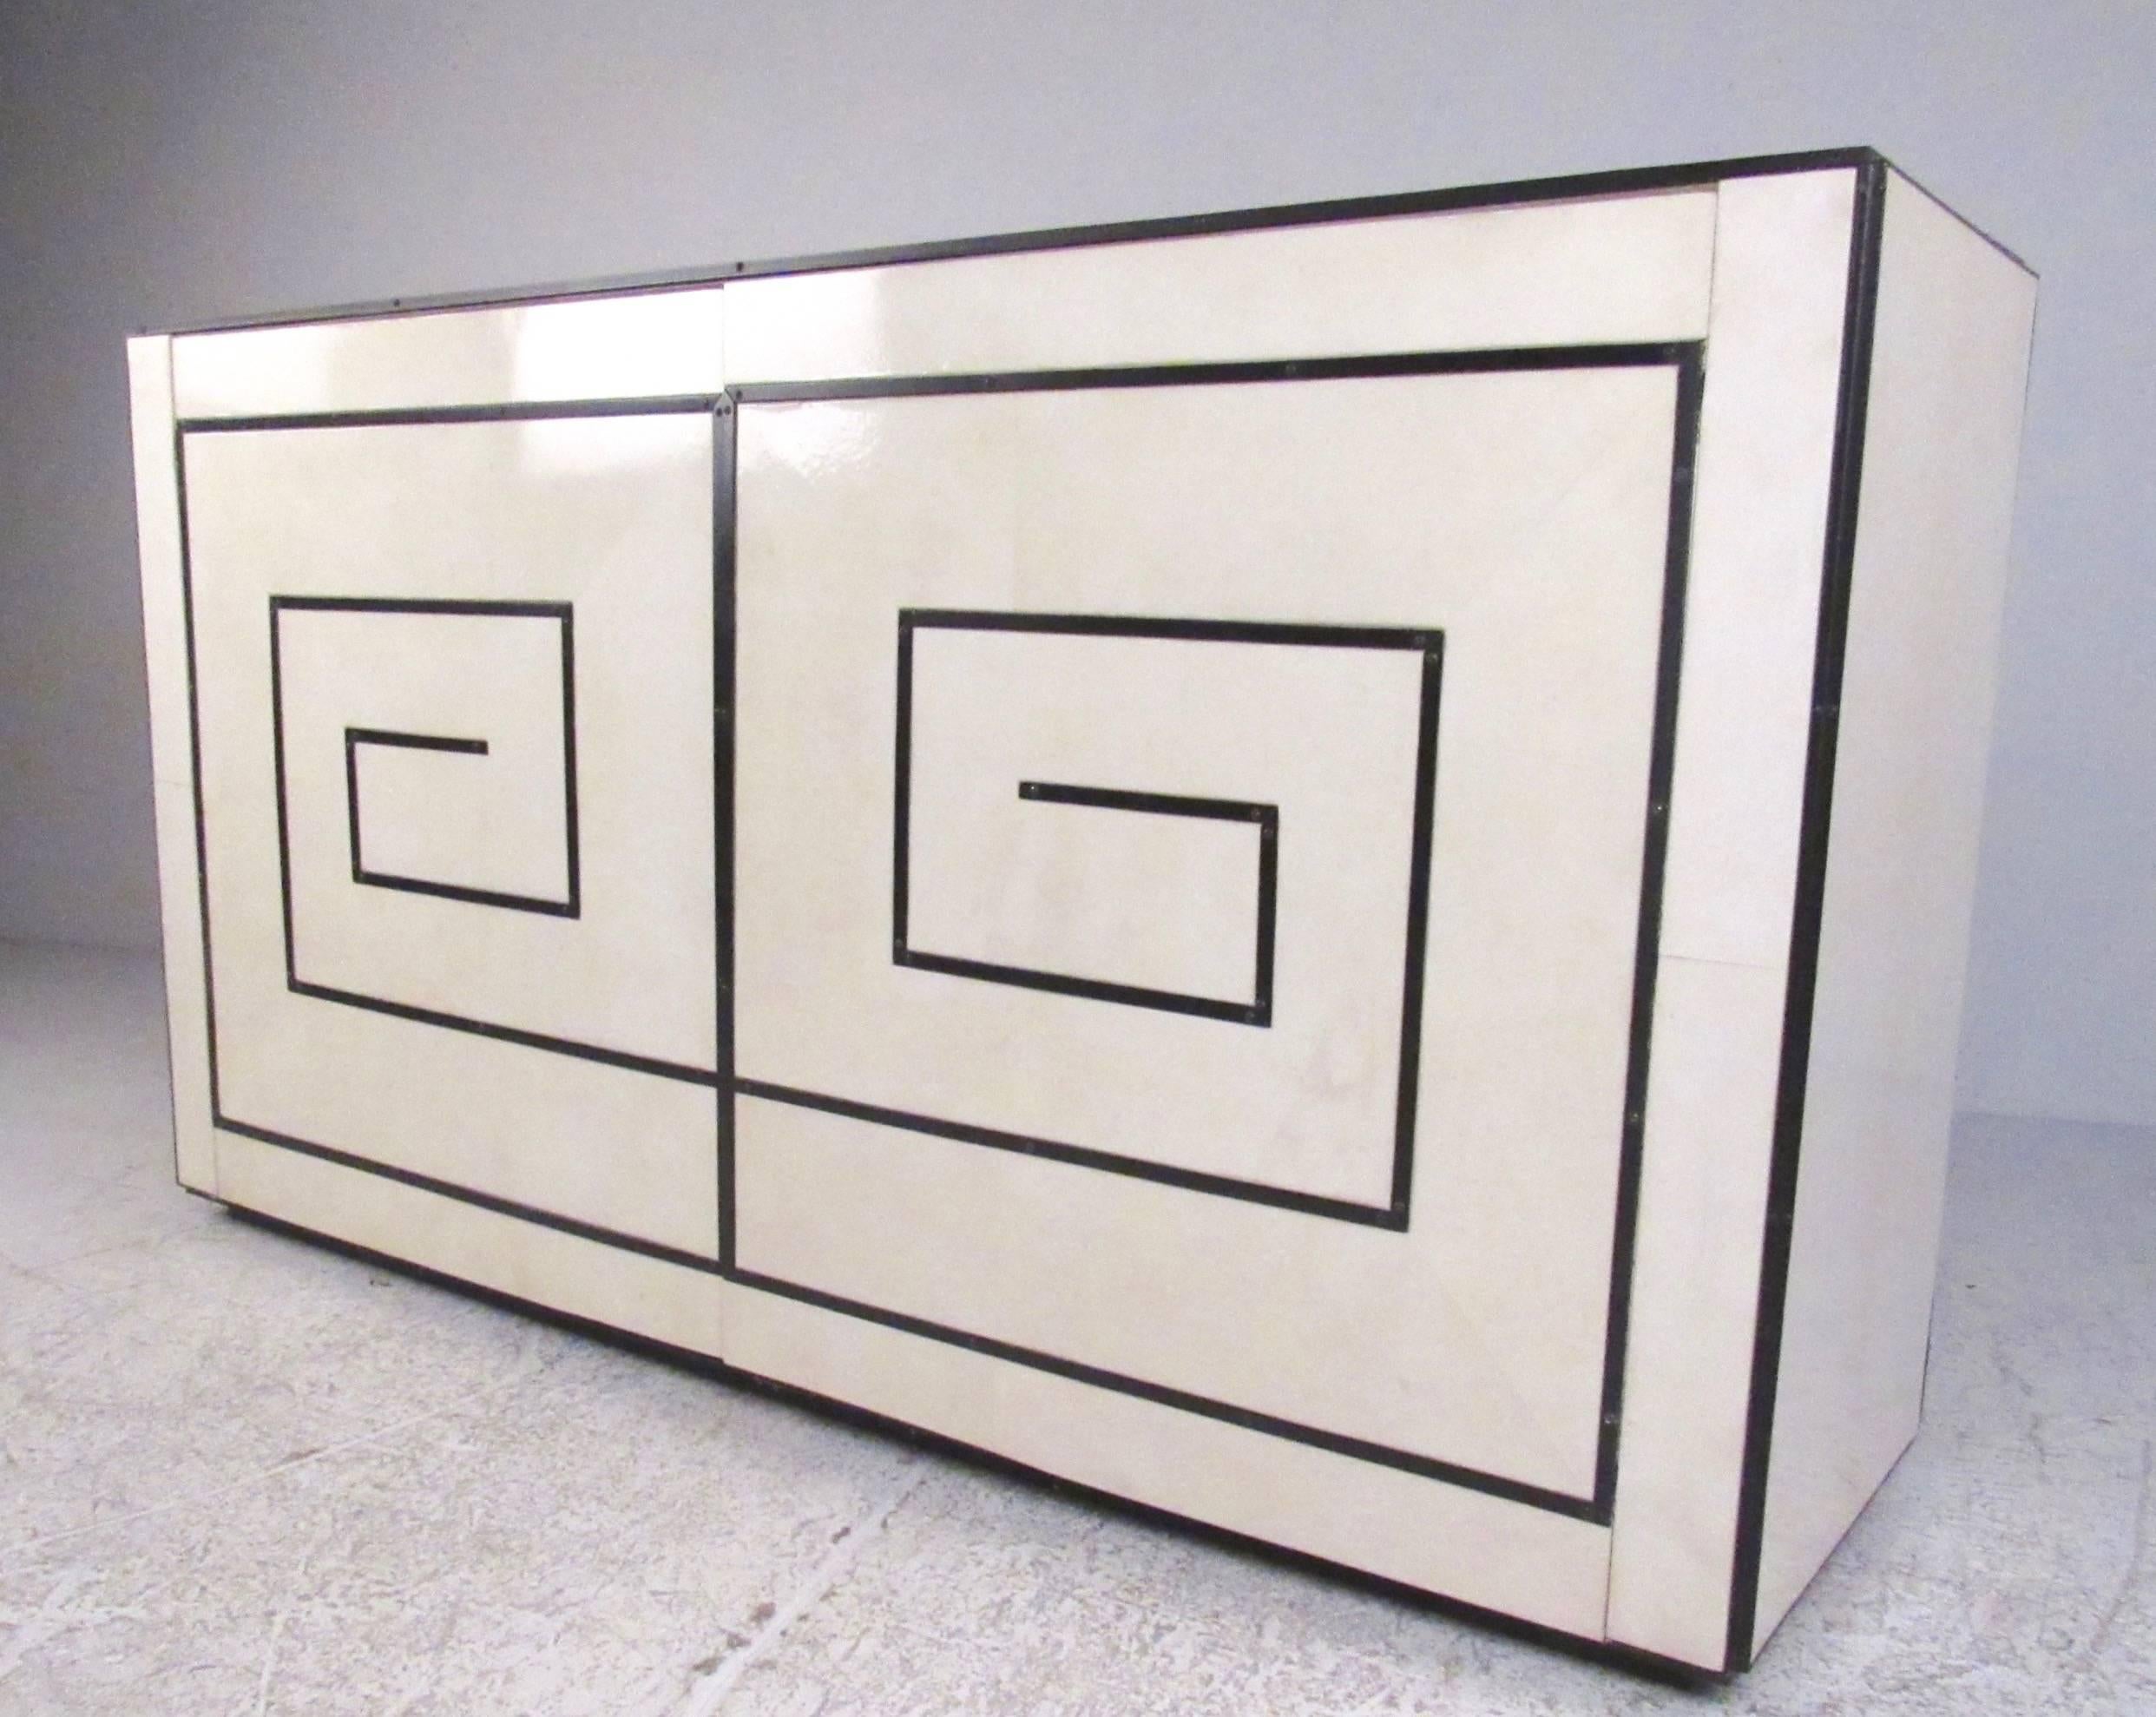 This unique modern credenza features a stylish parchment finish with unique black trim. Spacious interior cabinet space offers plenty of storage space with shelves and drawers perfect for dining room or office storage. Exquisite cabinet by Garrison